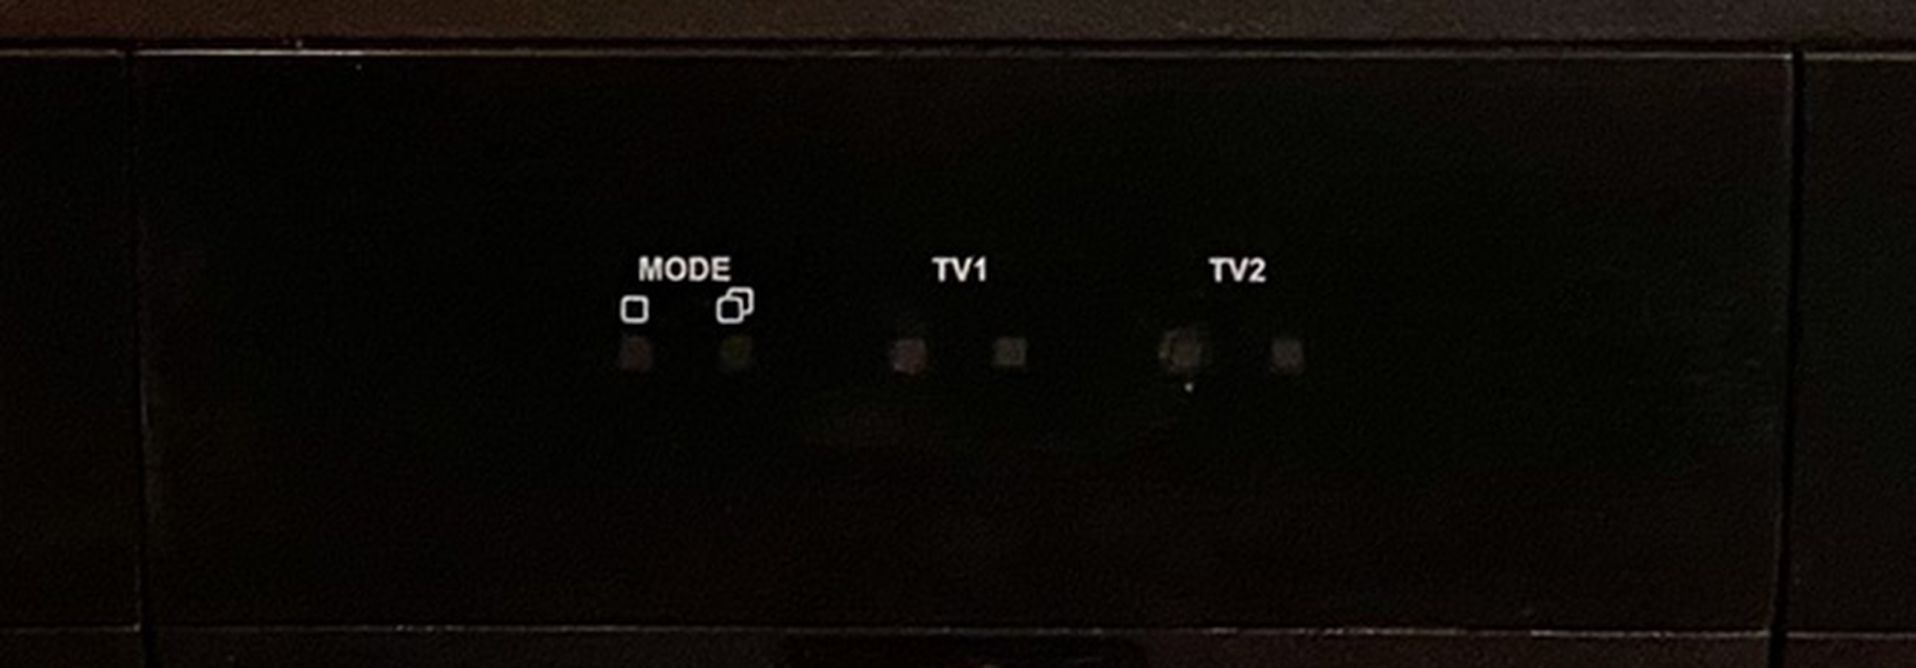 Dish Network VIP-722K HD DVR With 3 Remotes